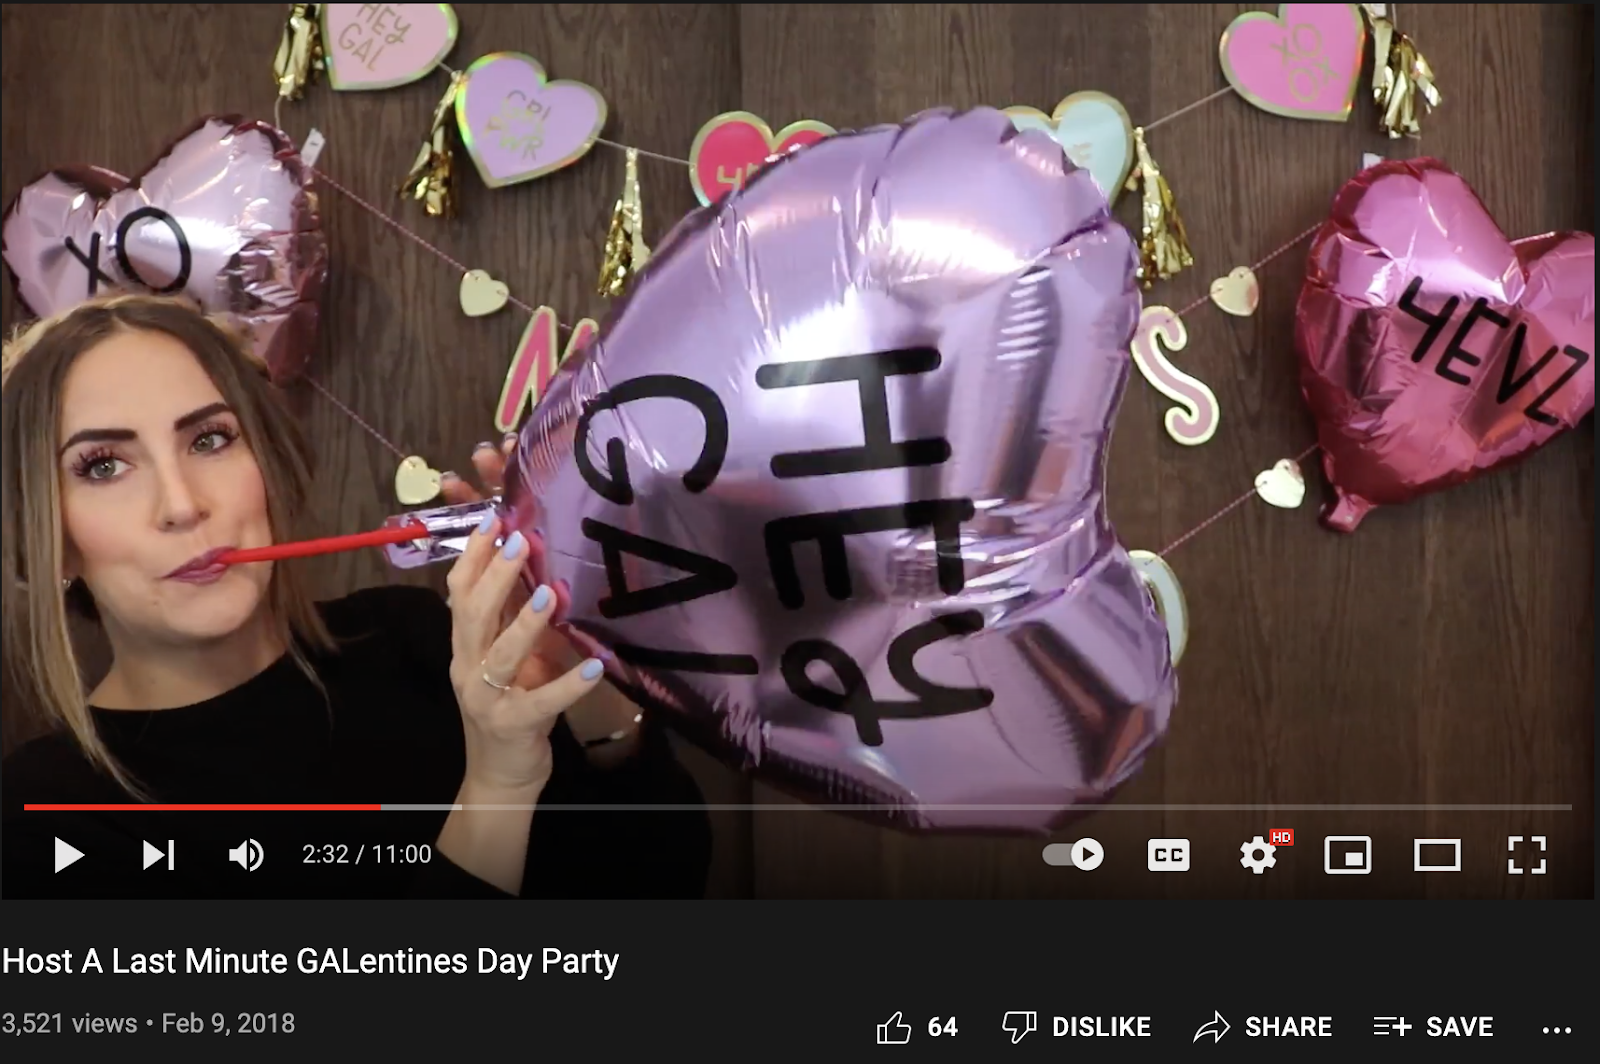 Screenshot of YouTube influencer blowing up a heart-shaped balloon that says "Hey Gal" for a video titled: Host A Last Minute GALentines Day Psrty